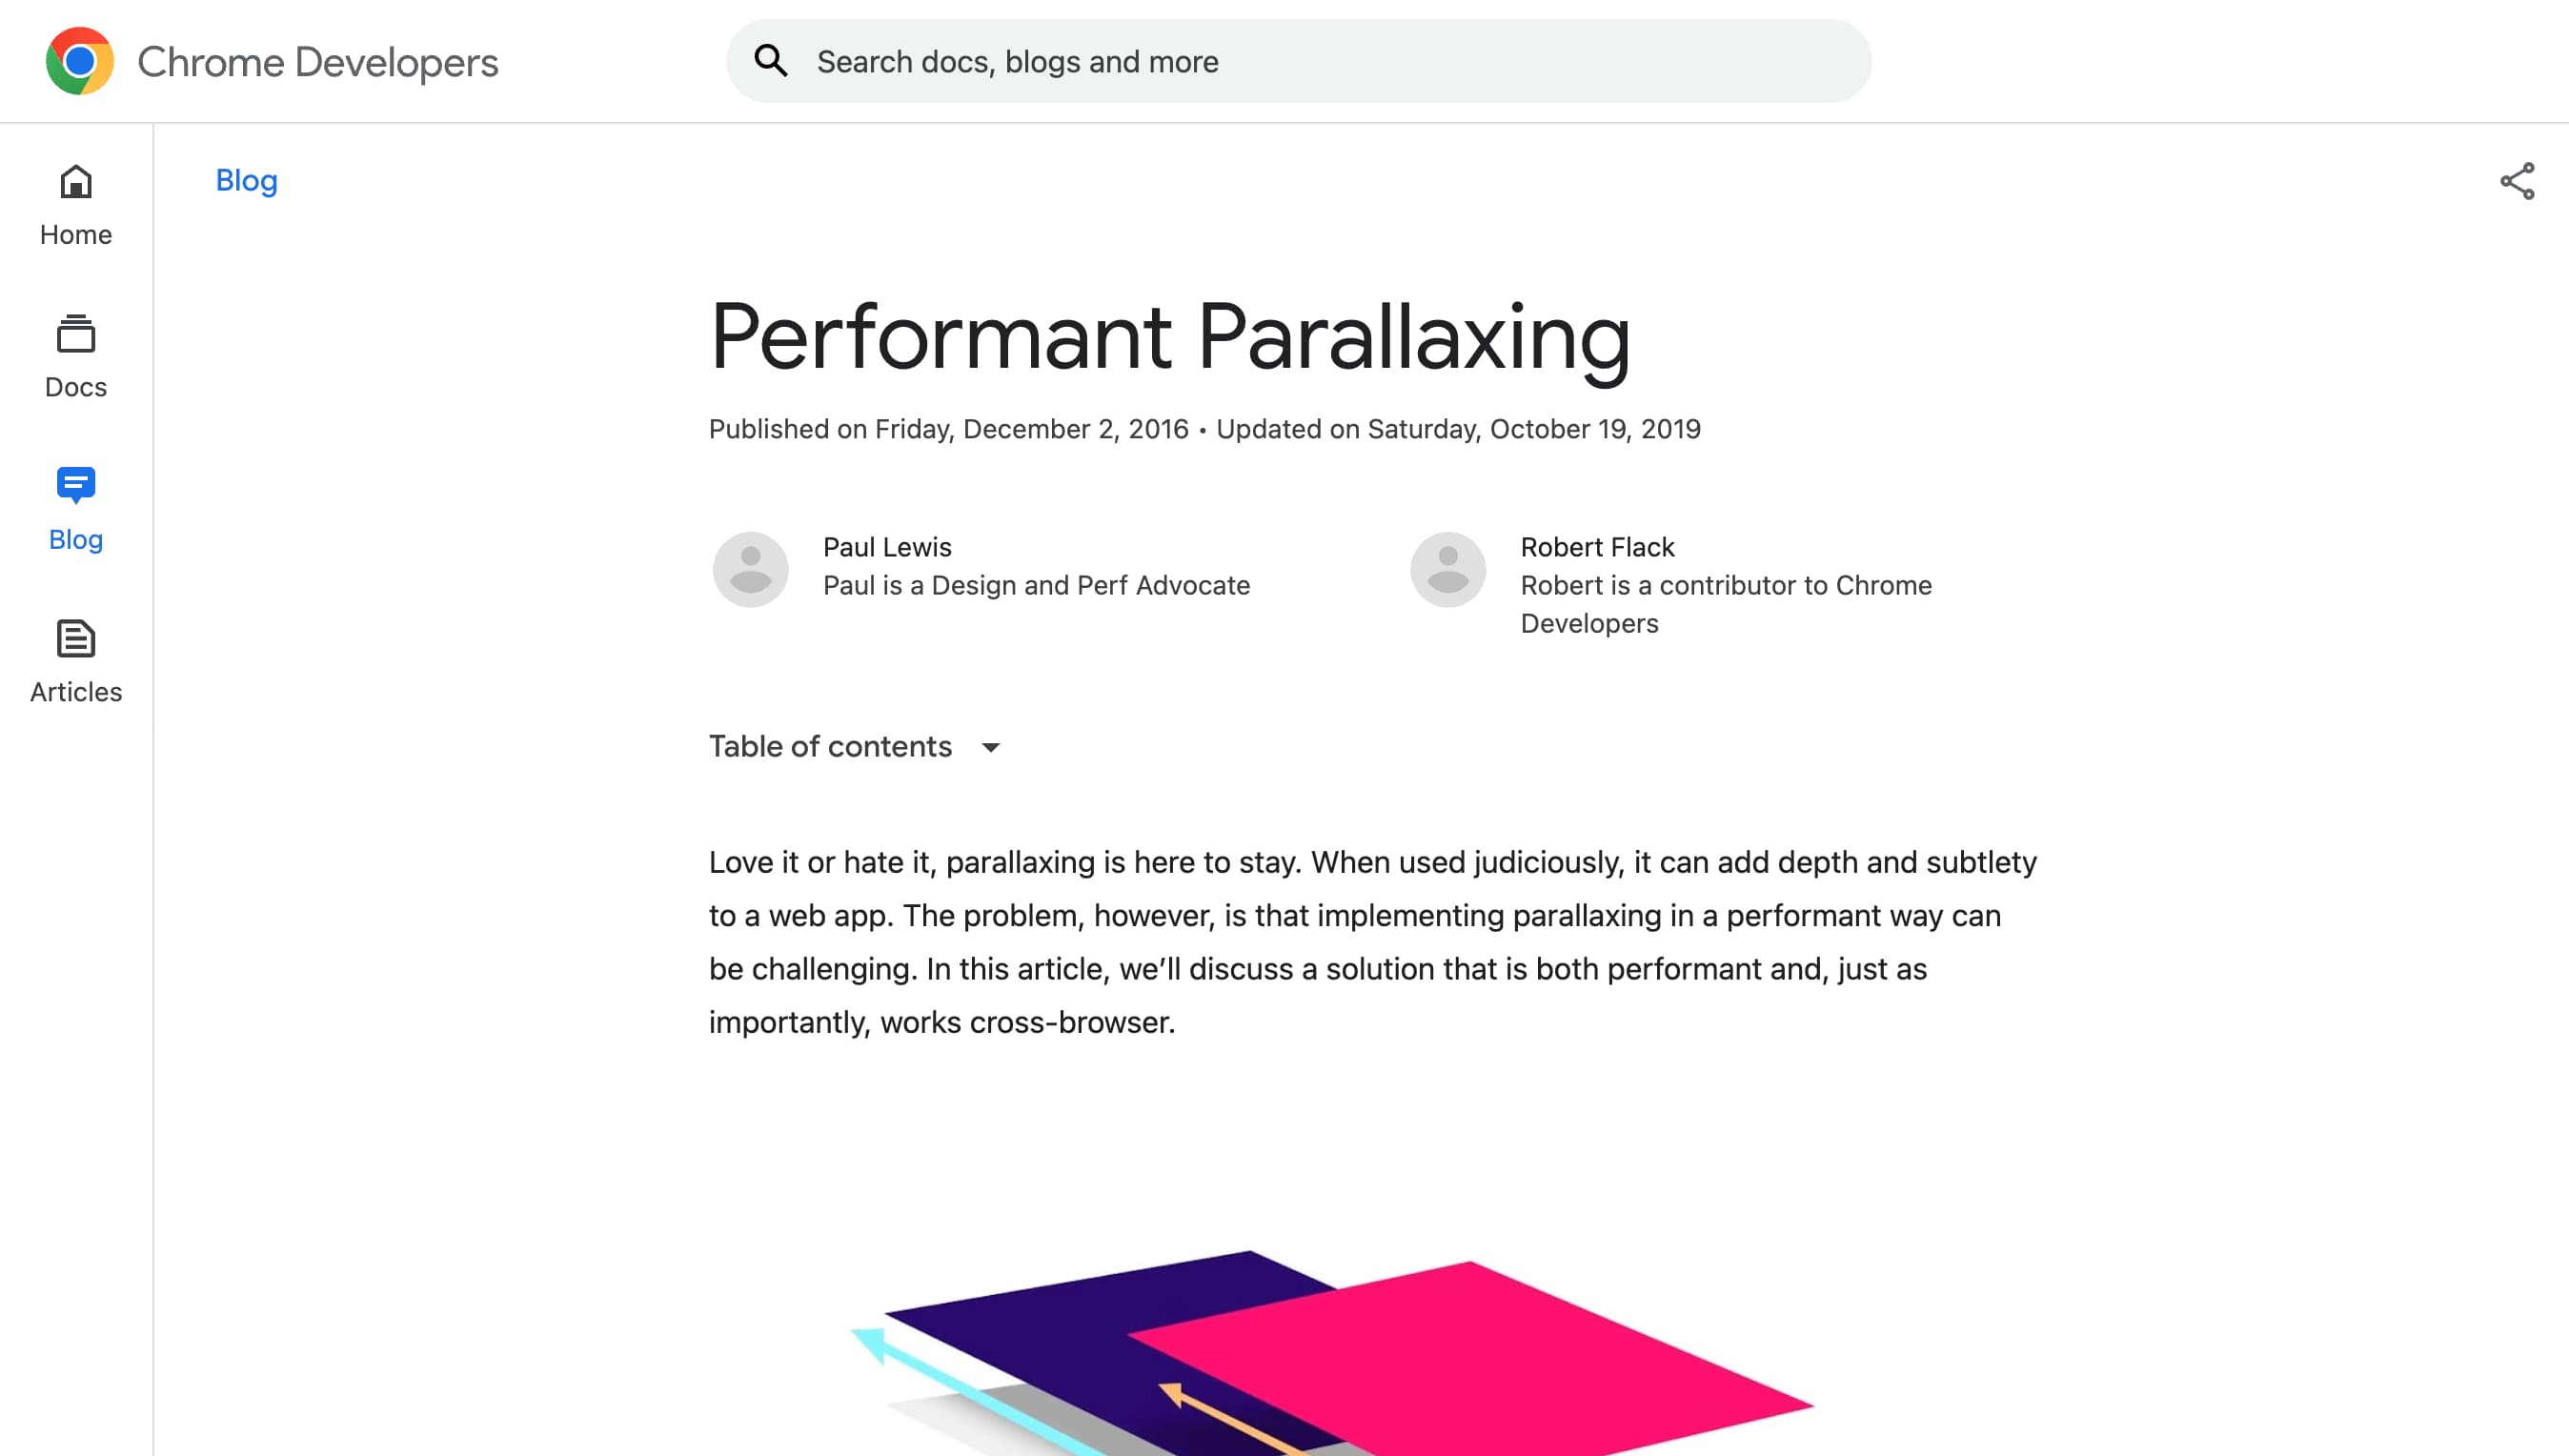 Screenshot of a blog post titled 'Performant Parallaxing' on the Chrome Developers blog. Link in caption